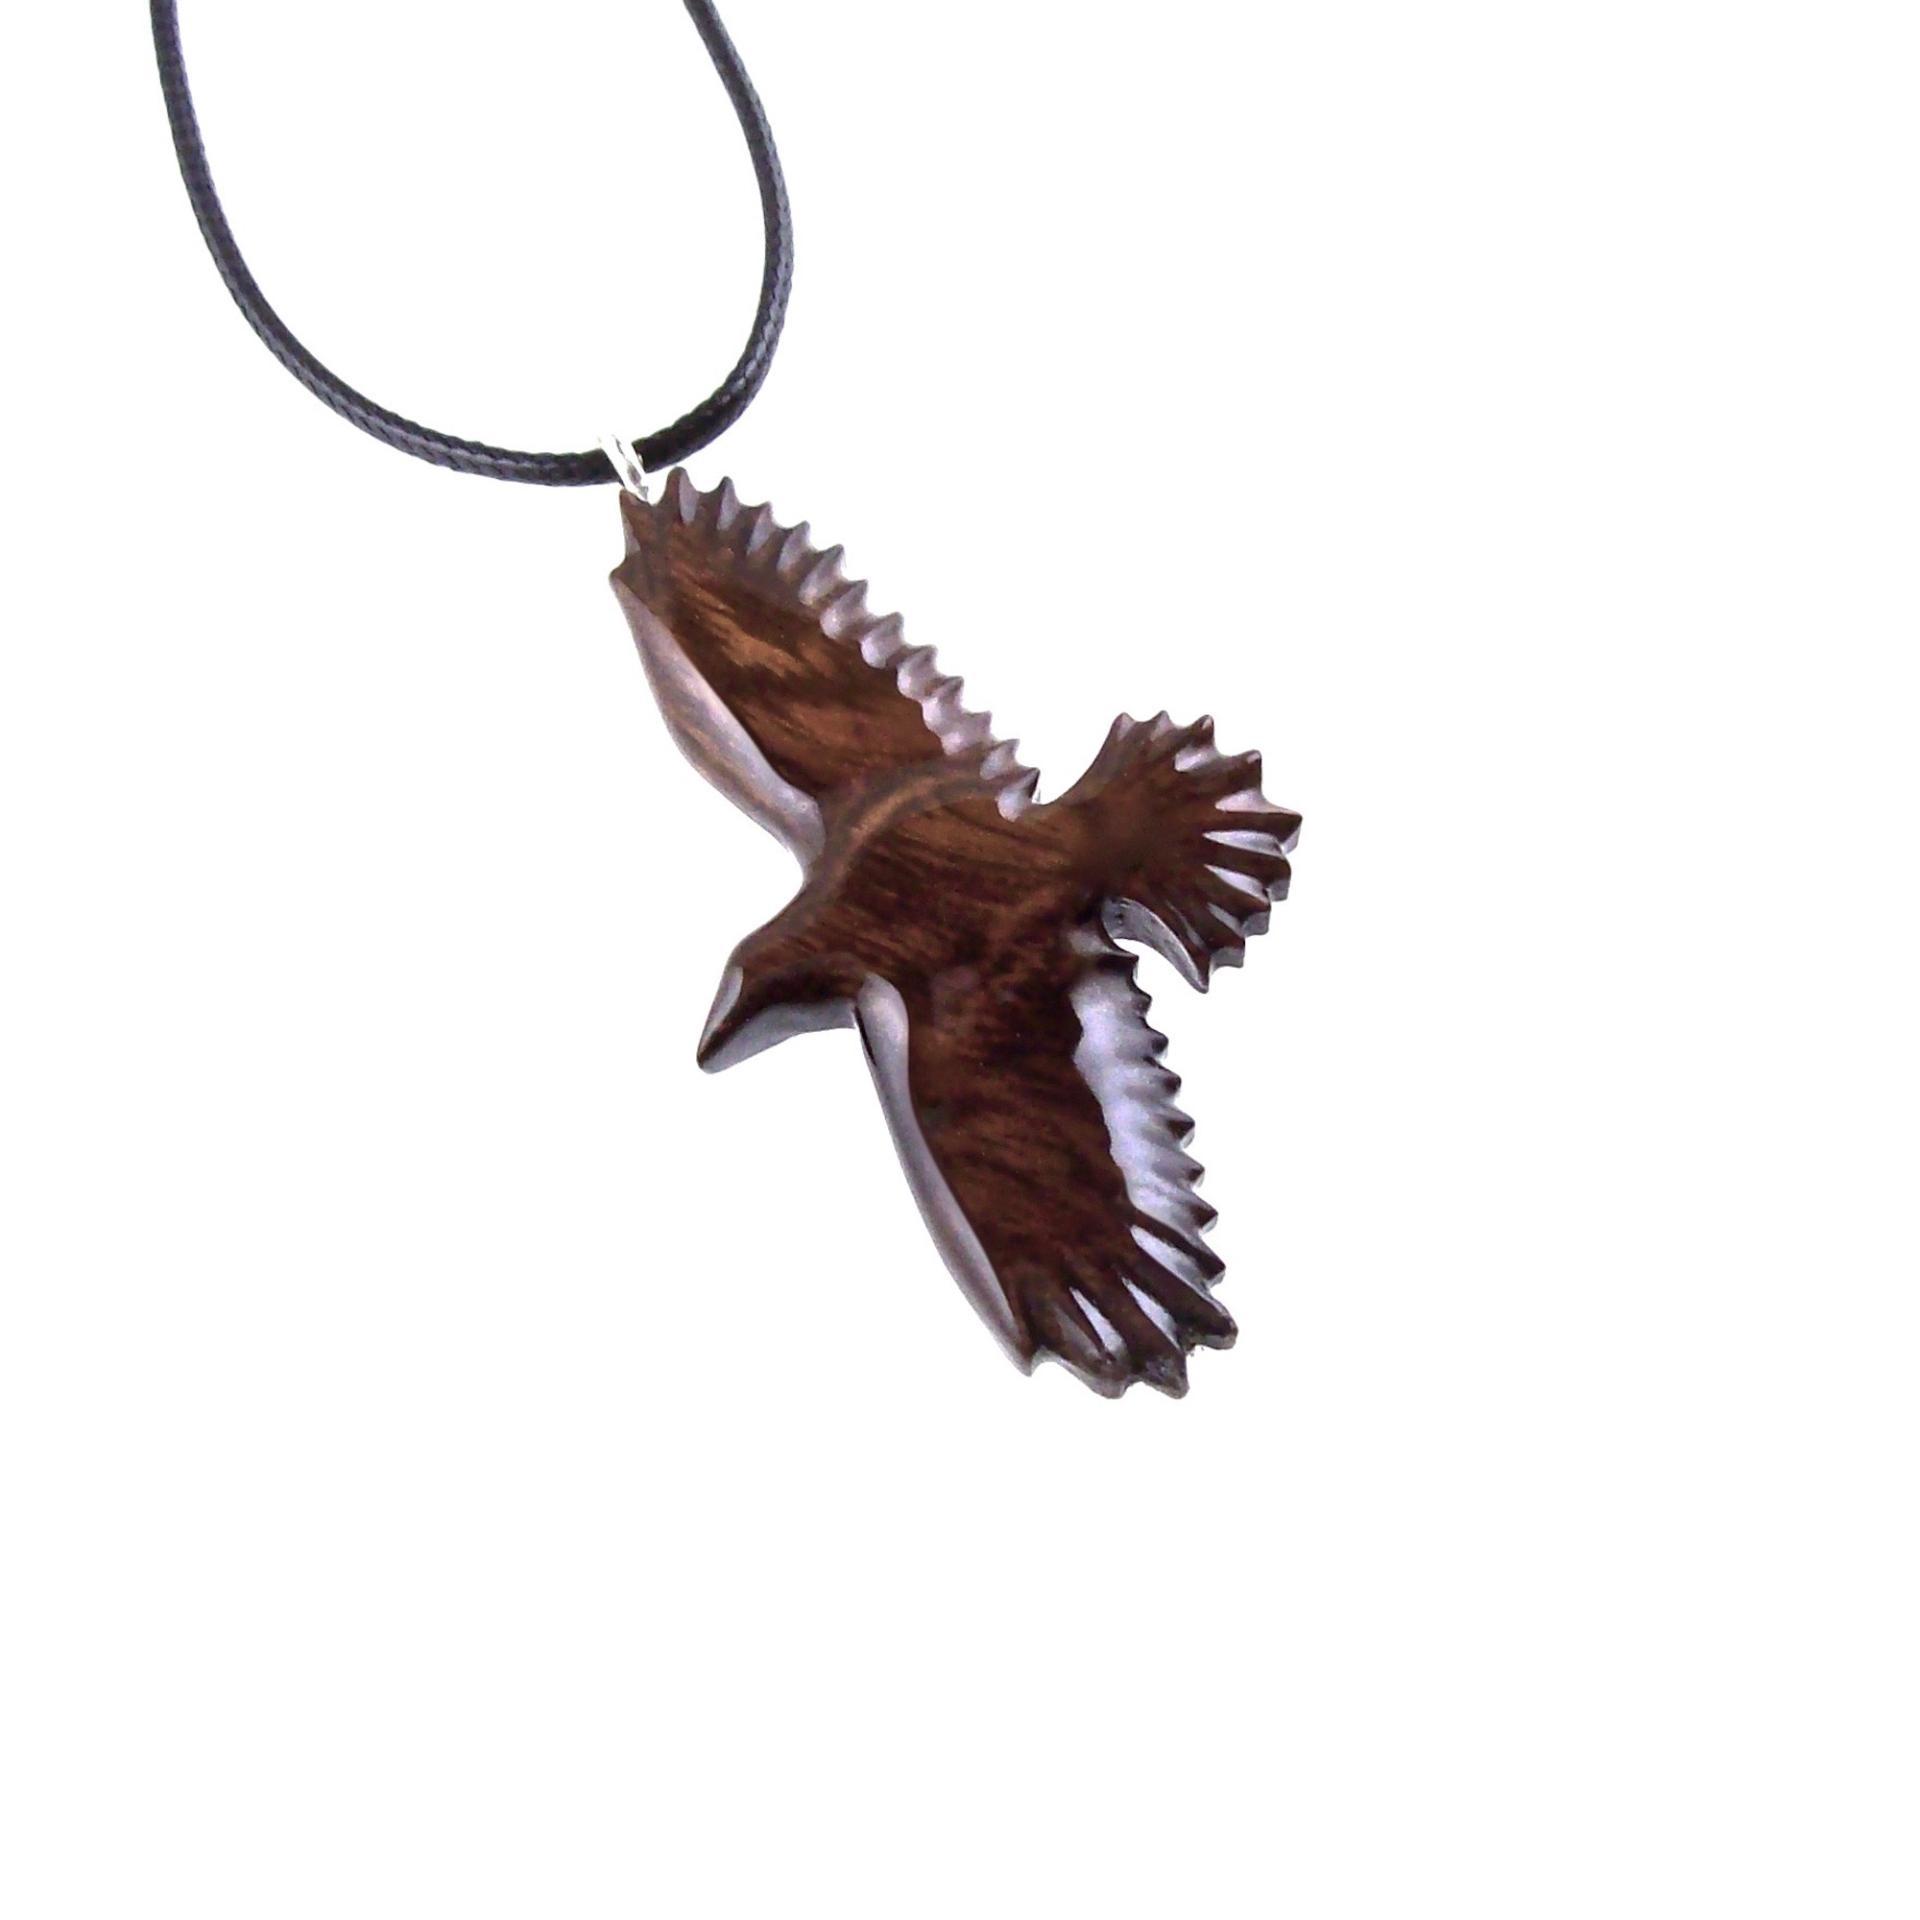 Hand Carved Raven Necklace for Men or Women, Wooden Crow Pendant, Totem Wood Bird Jewelry Gift for Her Him